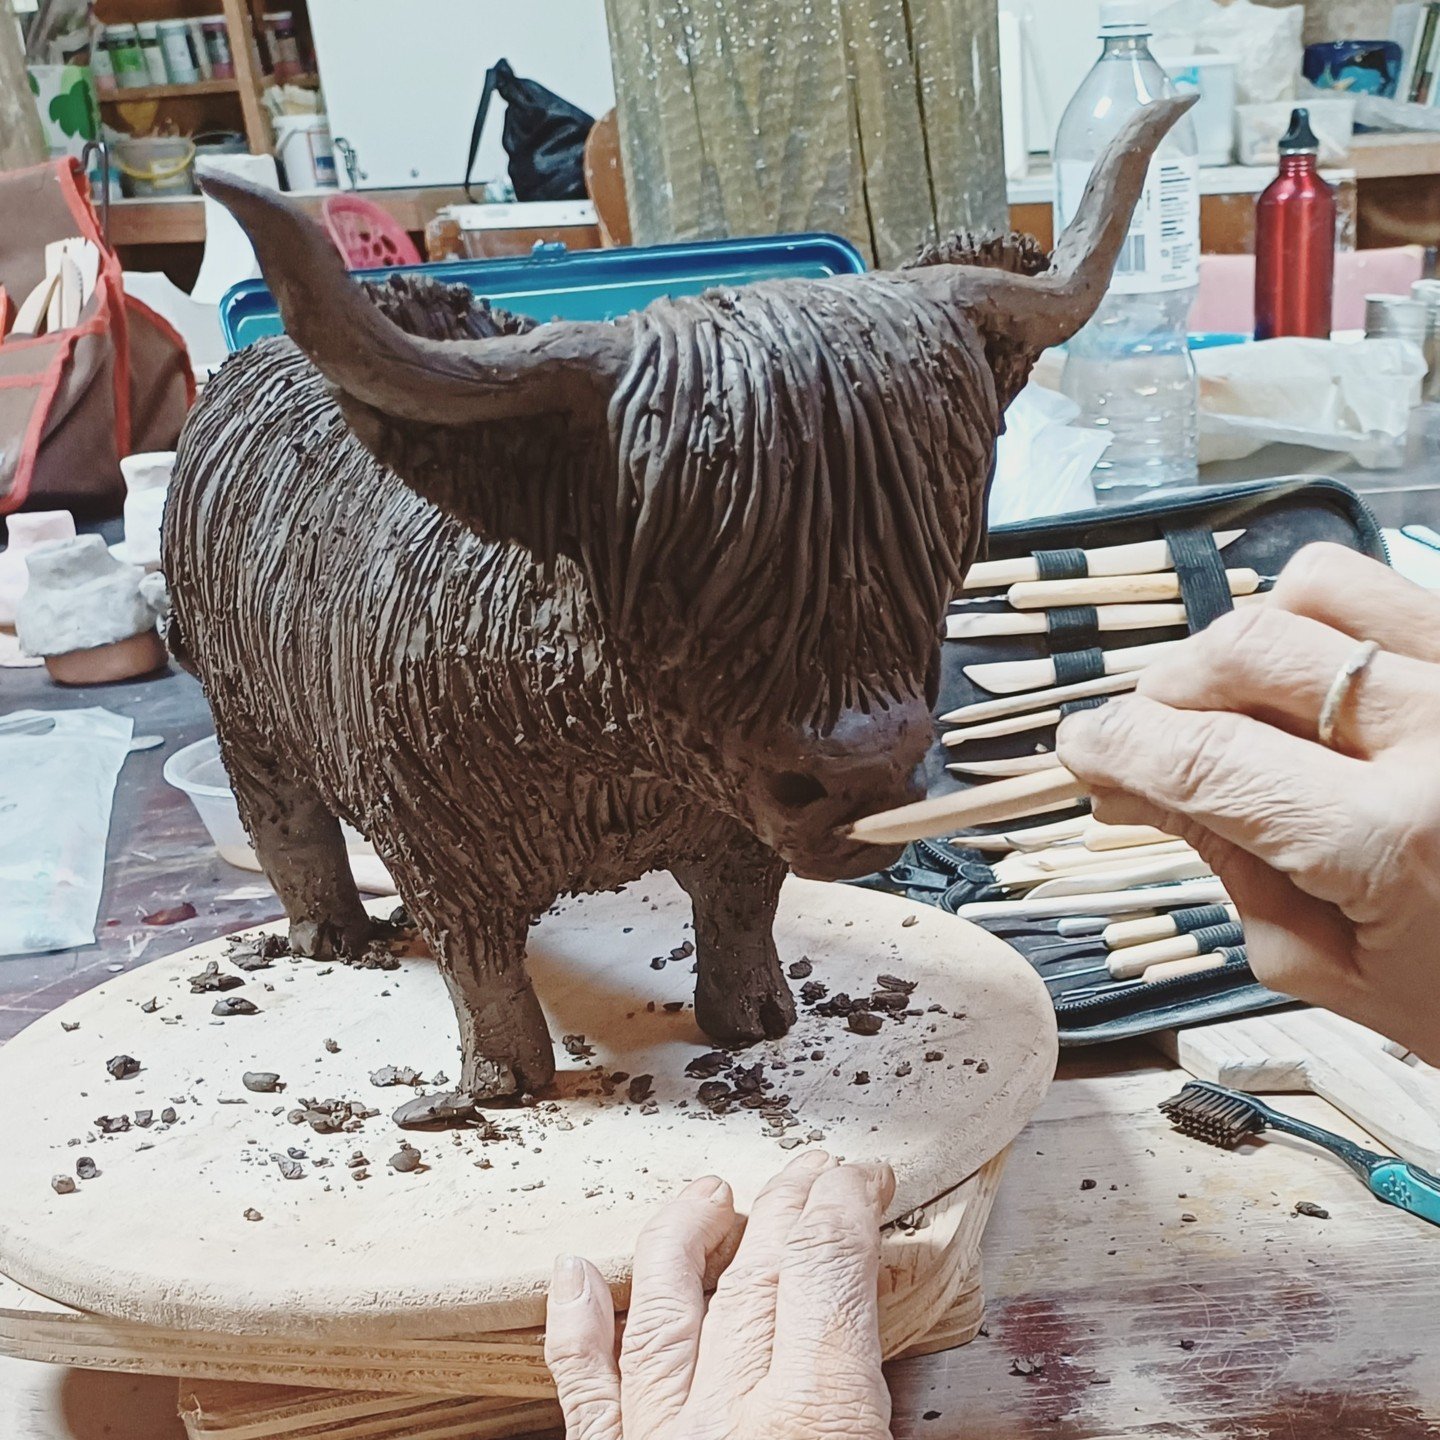 Dubraka making her &quot; KOO&quot; Cow in Scottish, at @sallyhookceramics workshops happening every 2 weeks at Phoenix School of Arts.

May classes are starting this Saturday 11 May. We have 1 spot available for both May and June classes and 2 spots